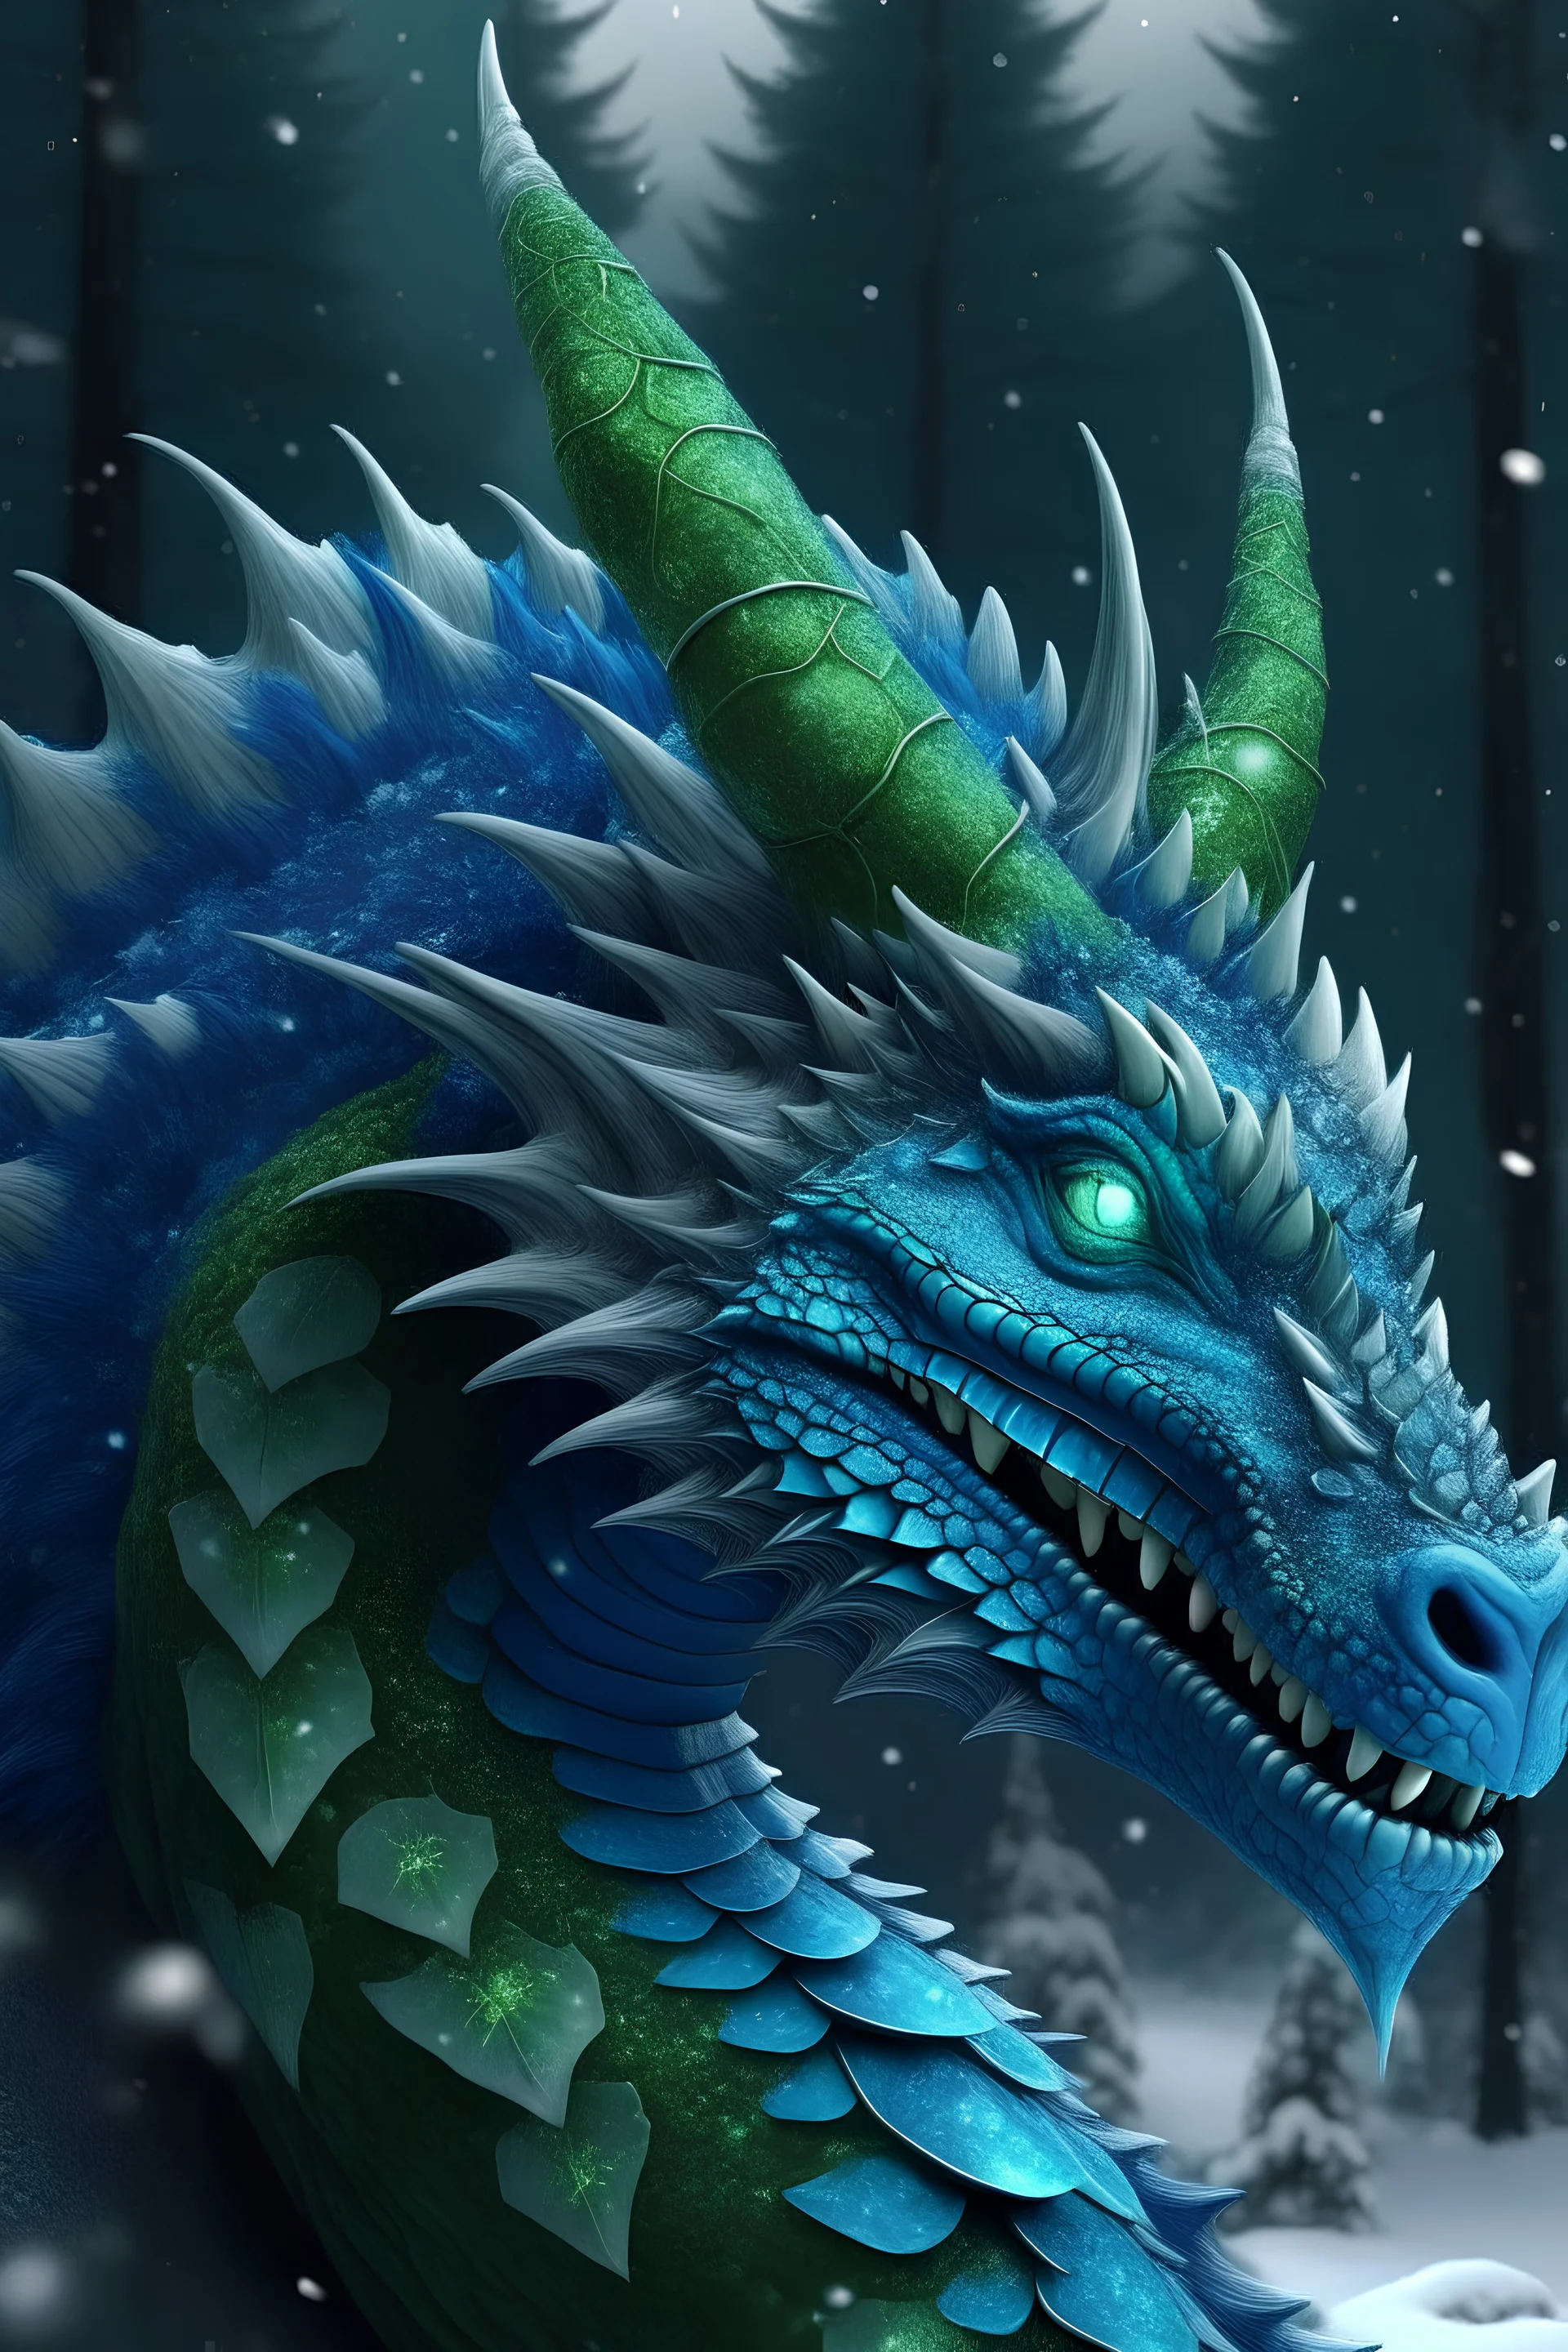 Dragon King, green -blue dragon head crown, decorated with shining crystals, in mystery snowy forest, ultra realistic